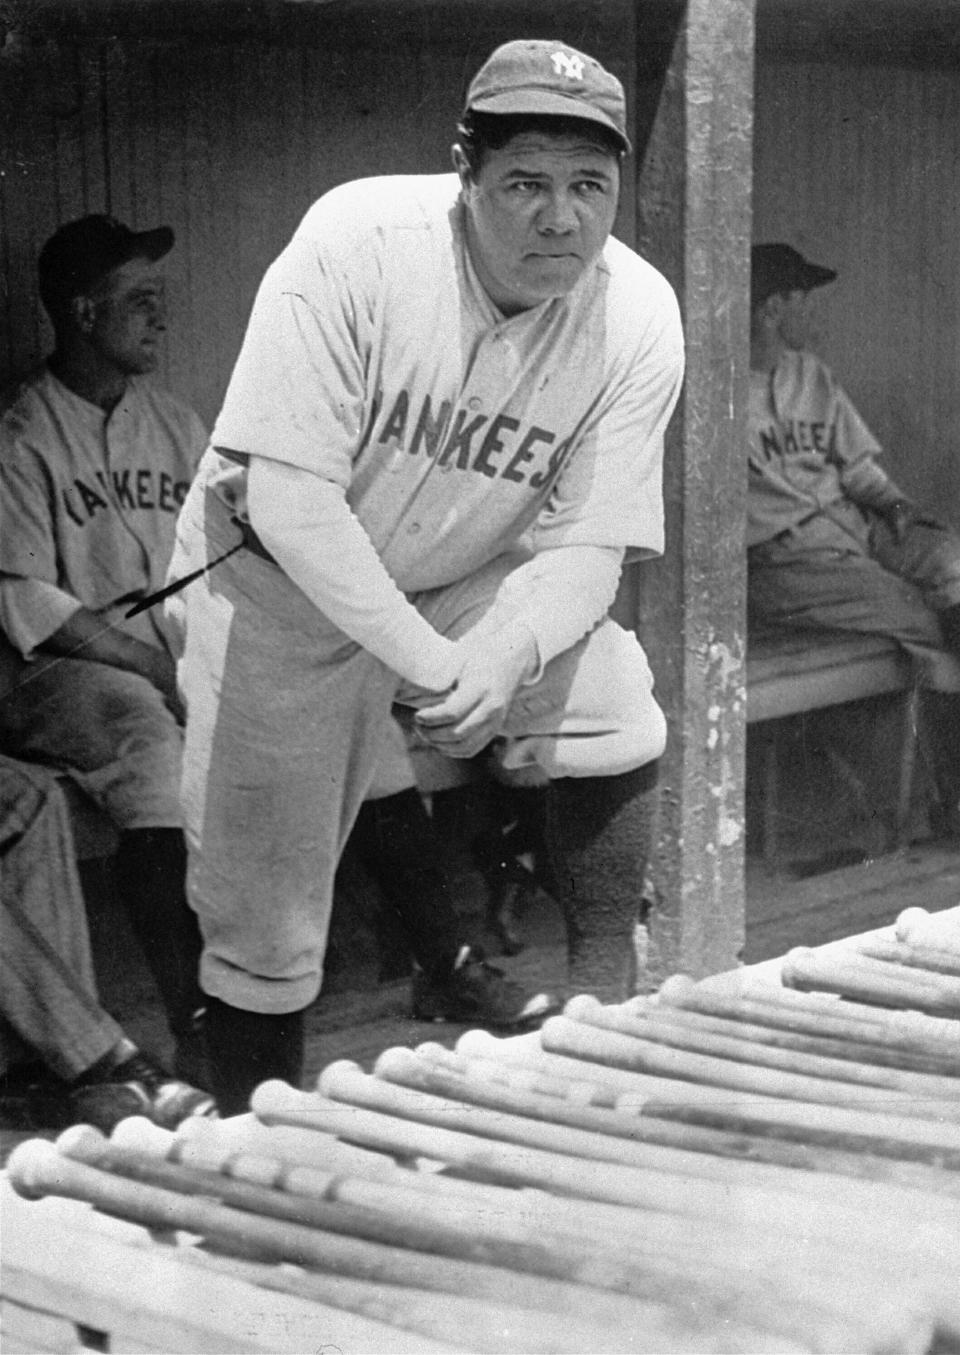 In this July 1929 file photo, New York Yankees' Babe Ruth, who was injured, stands in the dugout during the baseball team's game at Cleveland.